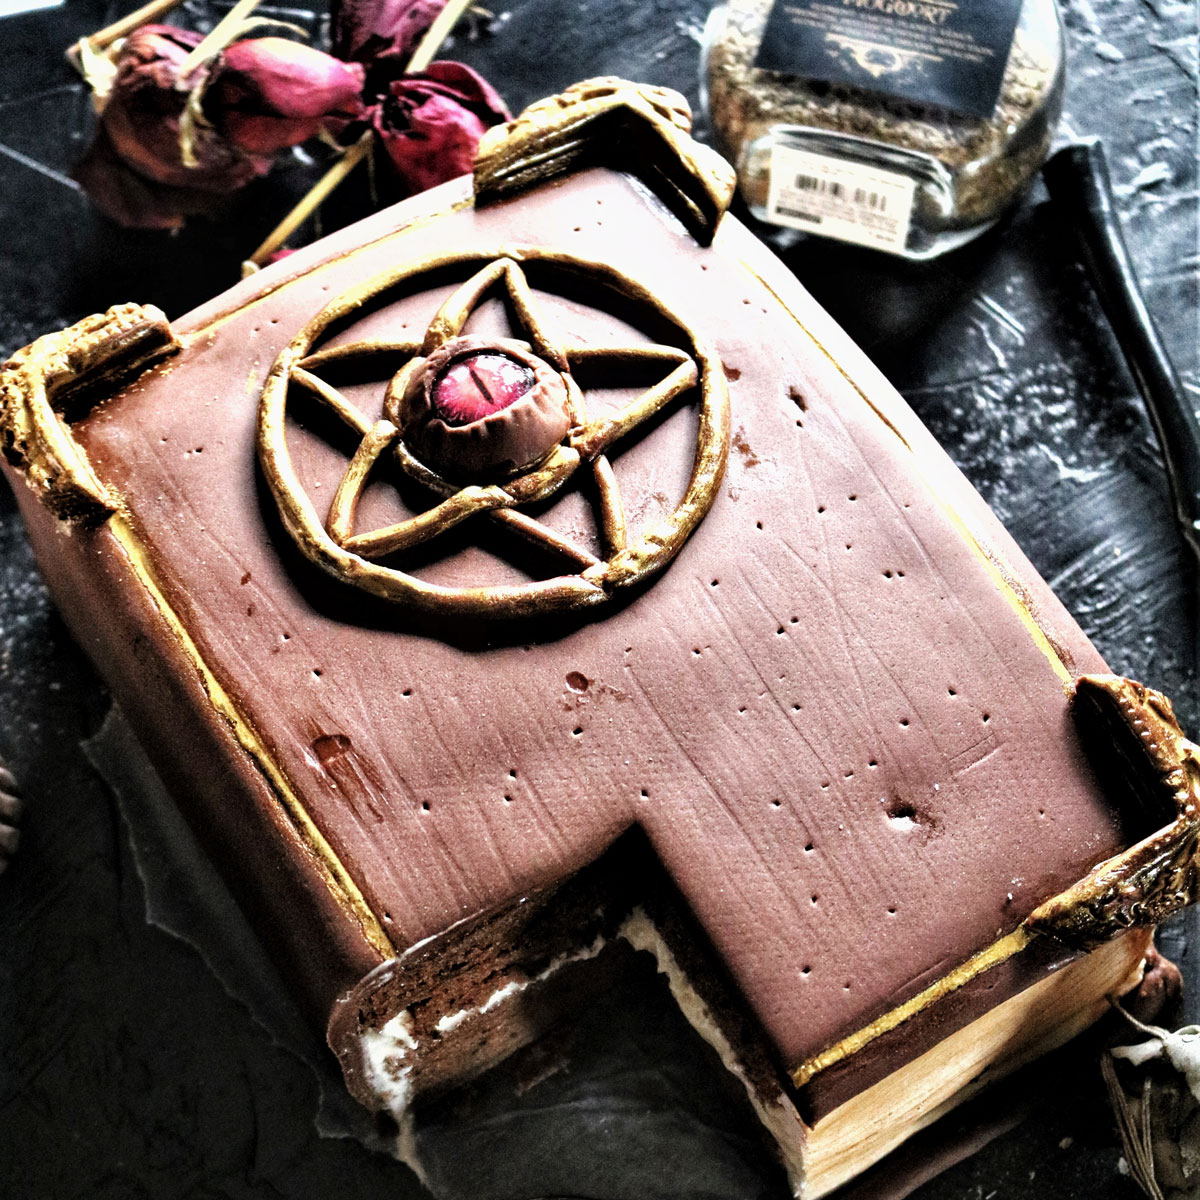 grimoire spell book vegan double dark chocolate cake with piece missing